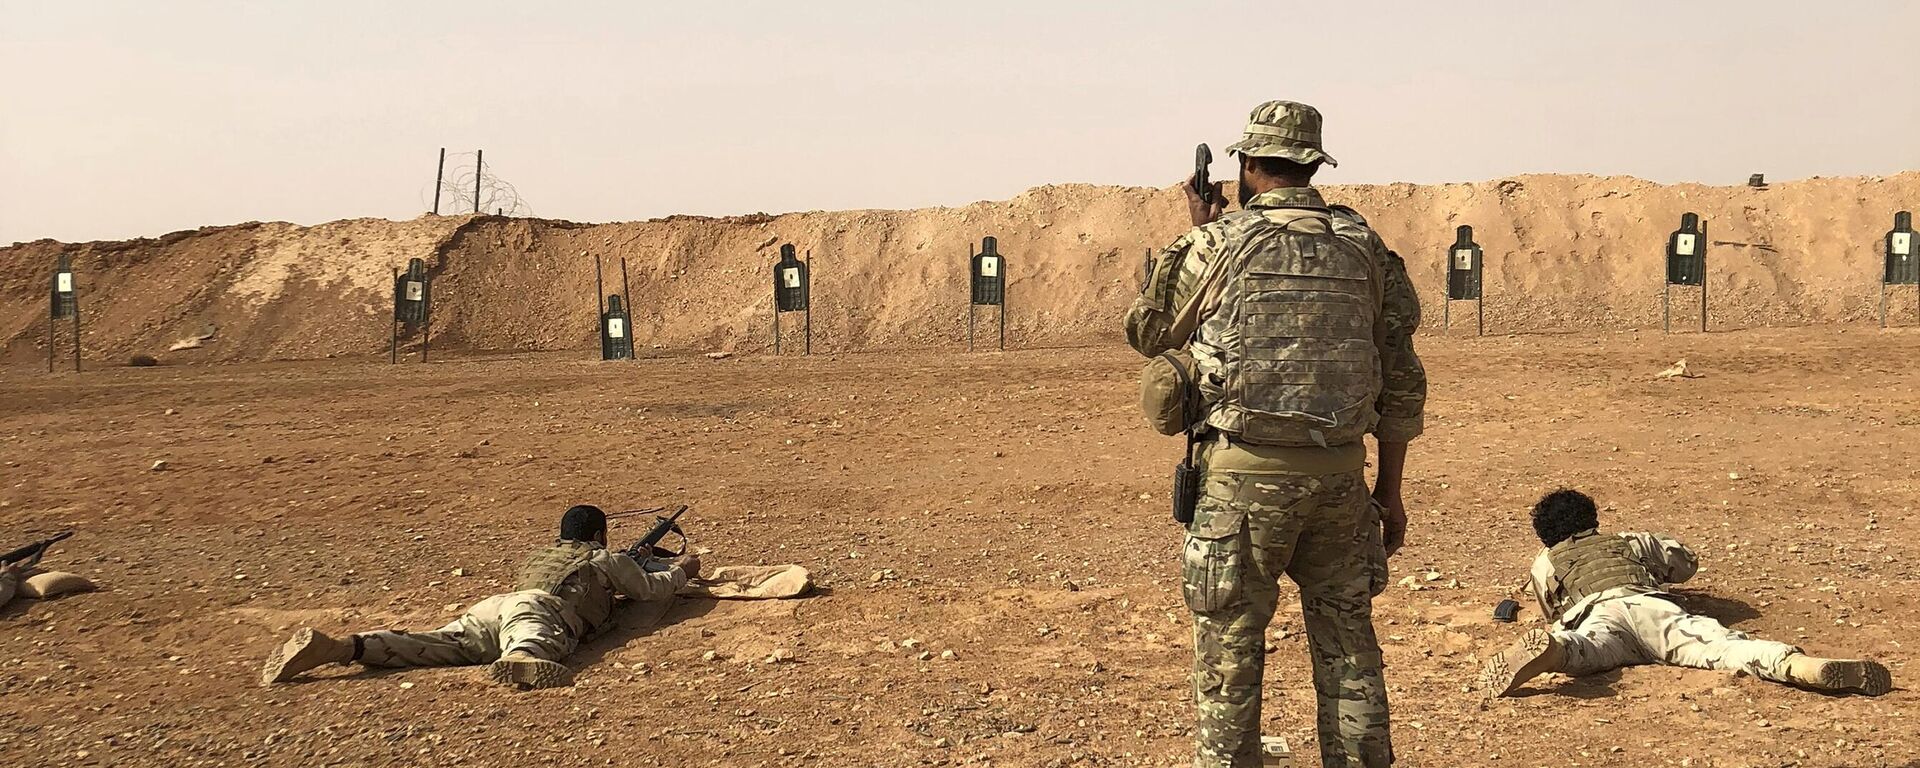 Members of the Maghawir al-Thawra Syrian opposition group receive firearms training from U.S. Army Special Forces soldiers at the al-Tanf military outpost in southern Syria on Monday, Oct. 22, 2018. - Sputnik International, 1920, 14.02.2023